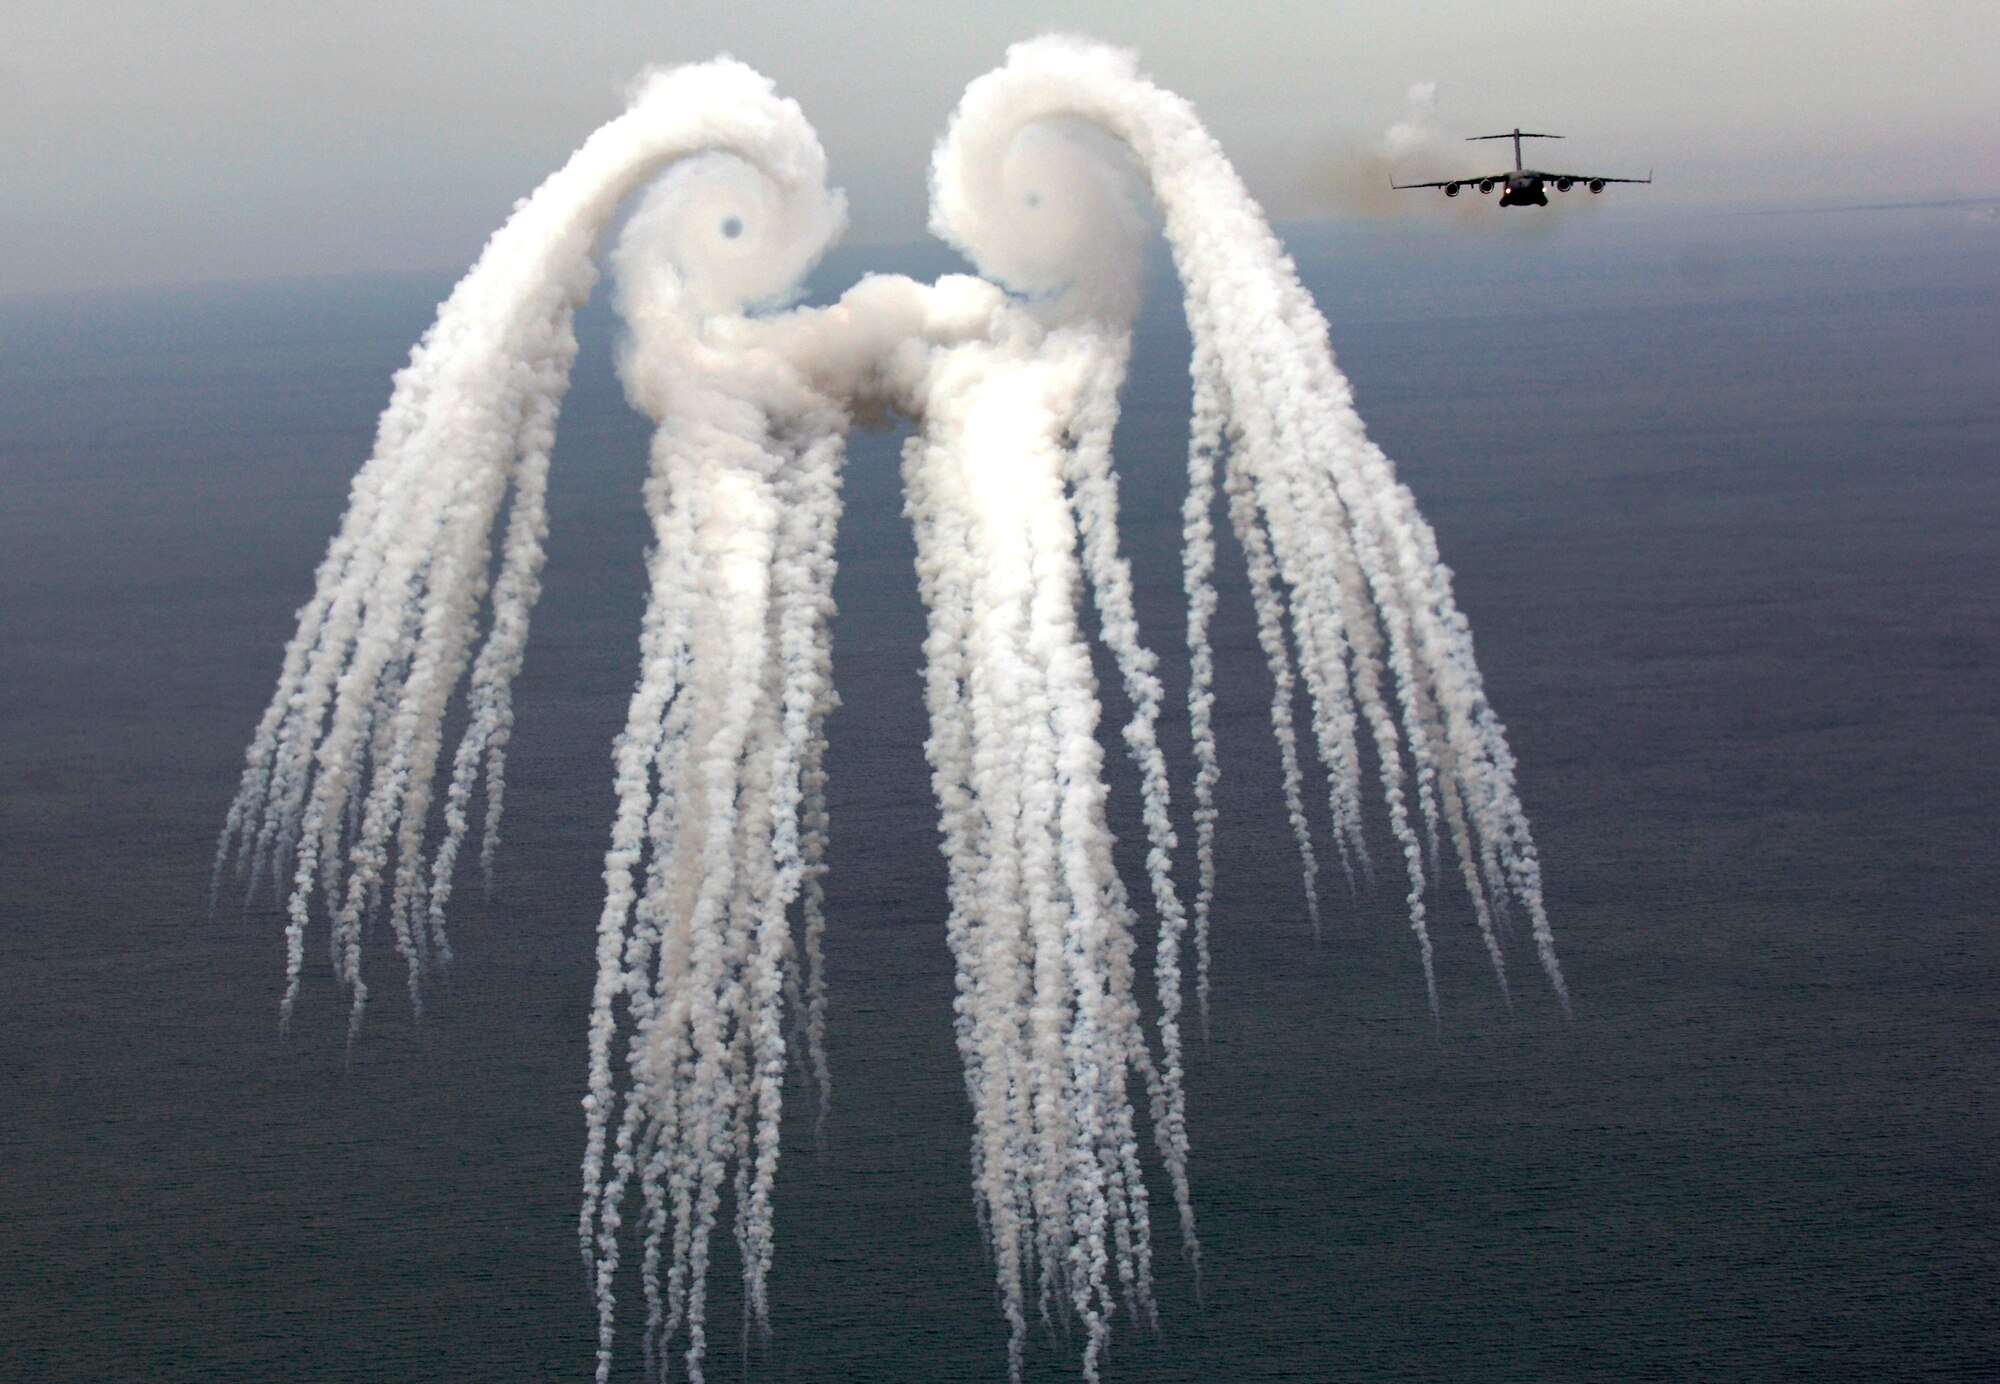 A C-17 Globemaster III from the 14th Airlift Squadron, Charleston Air Force Base, S.C. releases flares over the Atlantic Ocean near Charleston, S.C., during a training mission on Tuesday, May 16, 2006.  The "smoke angel" is caused by the vortex from the engines.  (U.S. Air Force photo/Tech. Sgt. Russell E. Cooley IV)